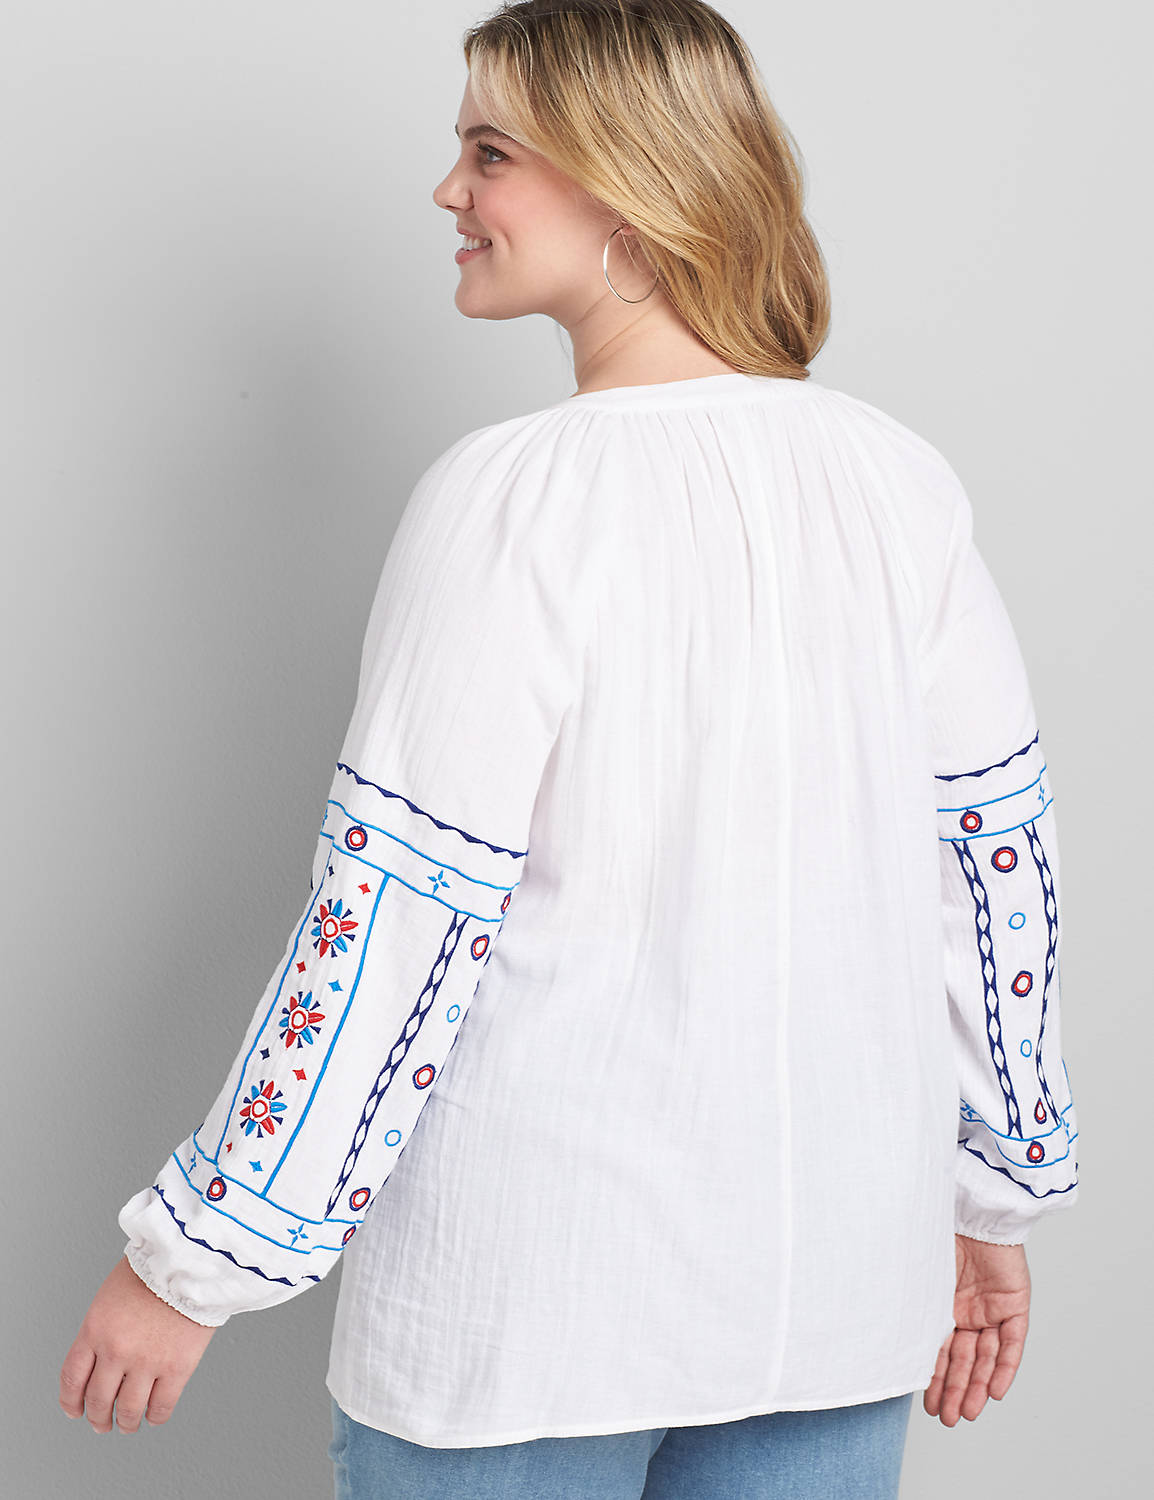 Notch-Neck Embroidered Peasant Top Product Image 2